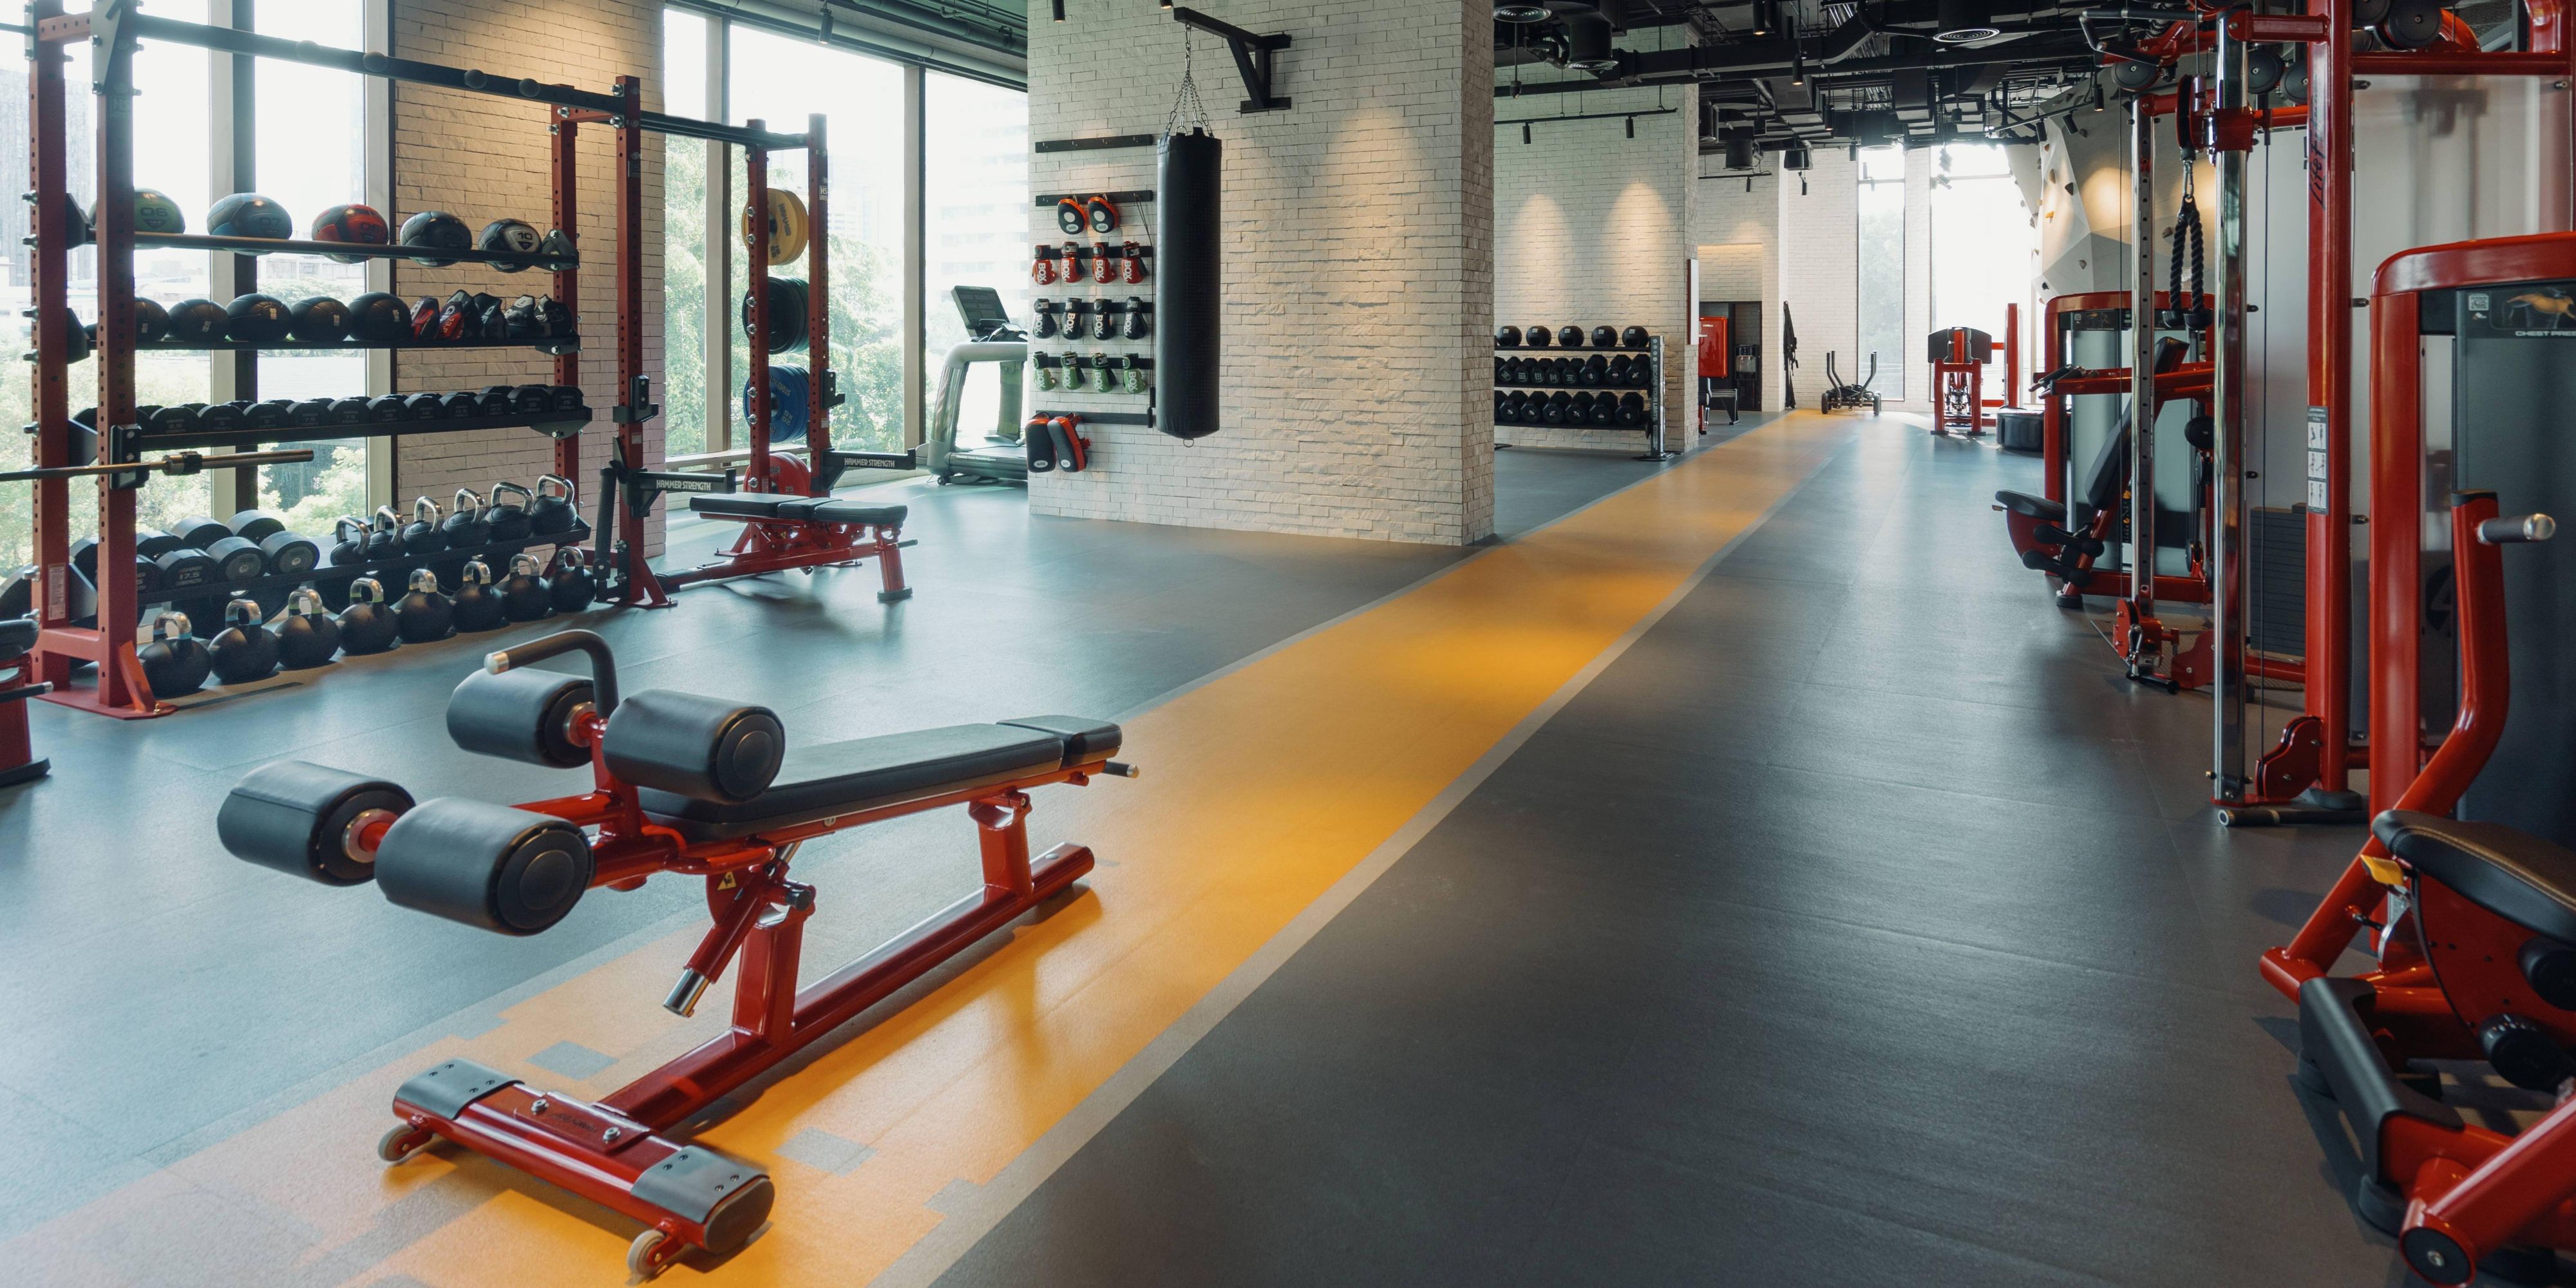 At Kimpton Maa-Lai Bangkok, we help every individual achieve their own brand of balance. Wellness and relaxation take centre stage at The GYM, where every room is stocked with a yoga mat. Tailored and personalised, our wellness haven attends to specific needs and areas of interest.